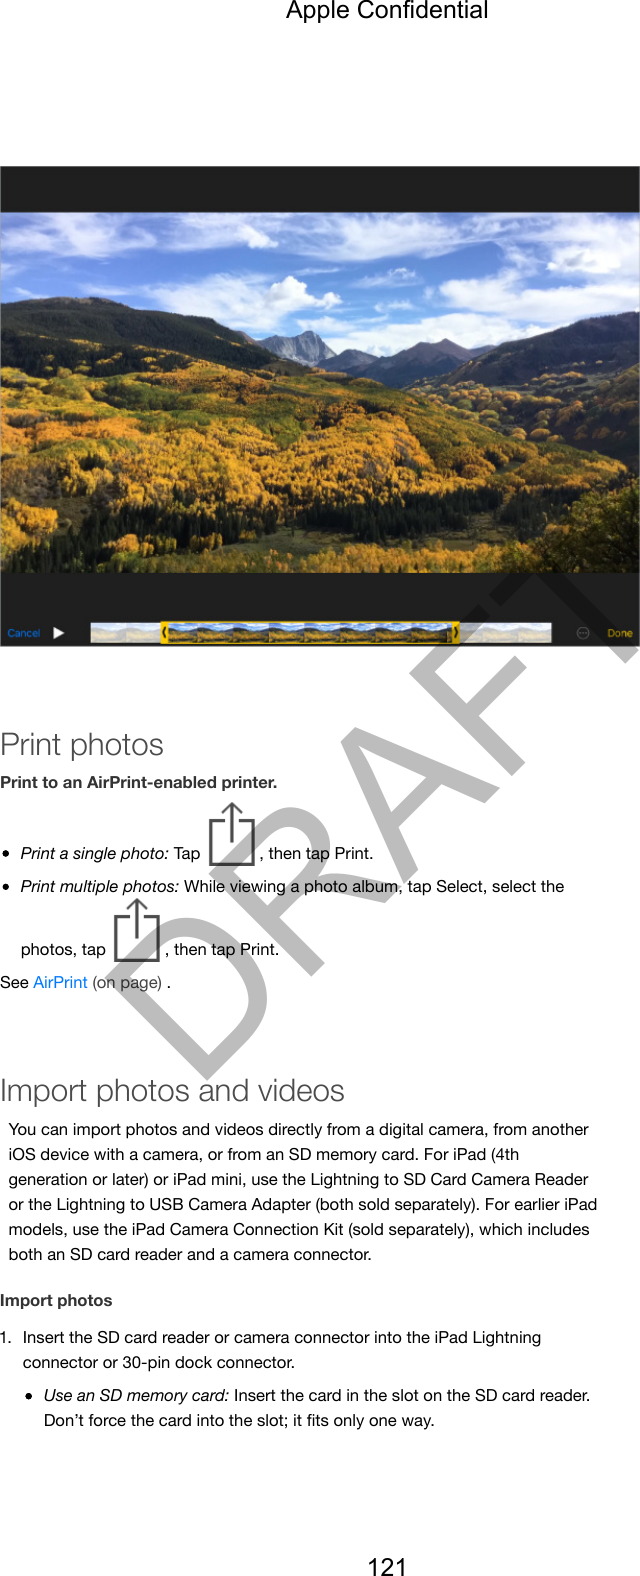 Print photosPrint to an AirPrint-enabled printer.Print a single photo: Tap  , then tap Print.Print multiple photos: While viewing a photo album, tap Select, select thephotos, tap  , then tap Print.See AirPrint (on page) .Import photos and videosYou can import photos and videos directly from a digital camera, from anotheriOS device with a camera, or from an SD memory card. For iPad (4thgeneration or later) or iPad mini, use the Lightning to SD Card Camera Readeror the Lightning to USB Camera Adapter (both sold separately). For earlier iPadmodels, use the iPad Camera Connection Kit (sold separately), which includesboth an SD card reader and a camera connector.Import photos1. Insert the SD card reader or camera connector into the iPad Lightningconnector or 30-pin dock connector.Use an SD memory card: Insert the card in the slot on the SD card reader.Don’t force the card into the slot; it ﬁts only one way.Apple Confidential121DRAFT